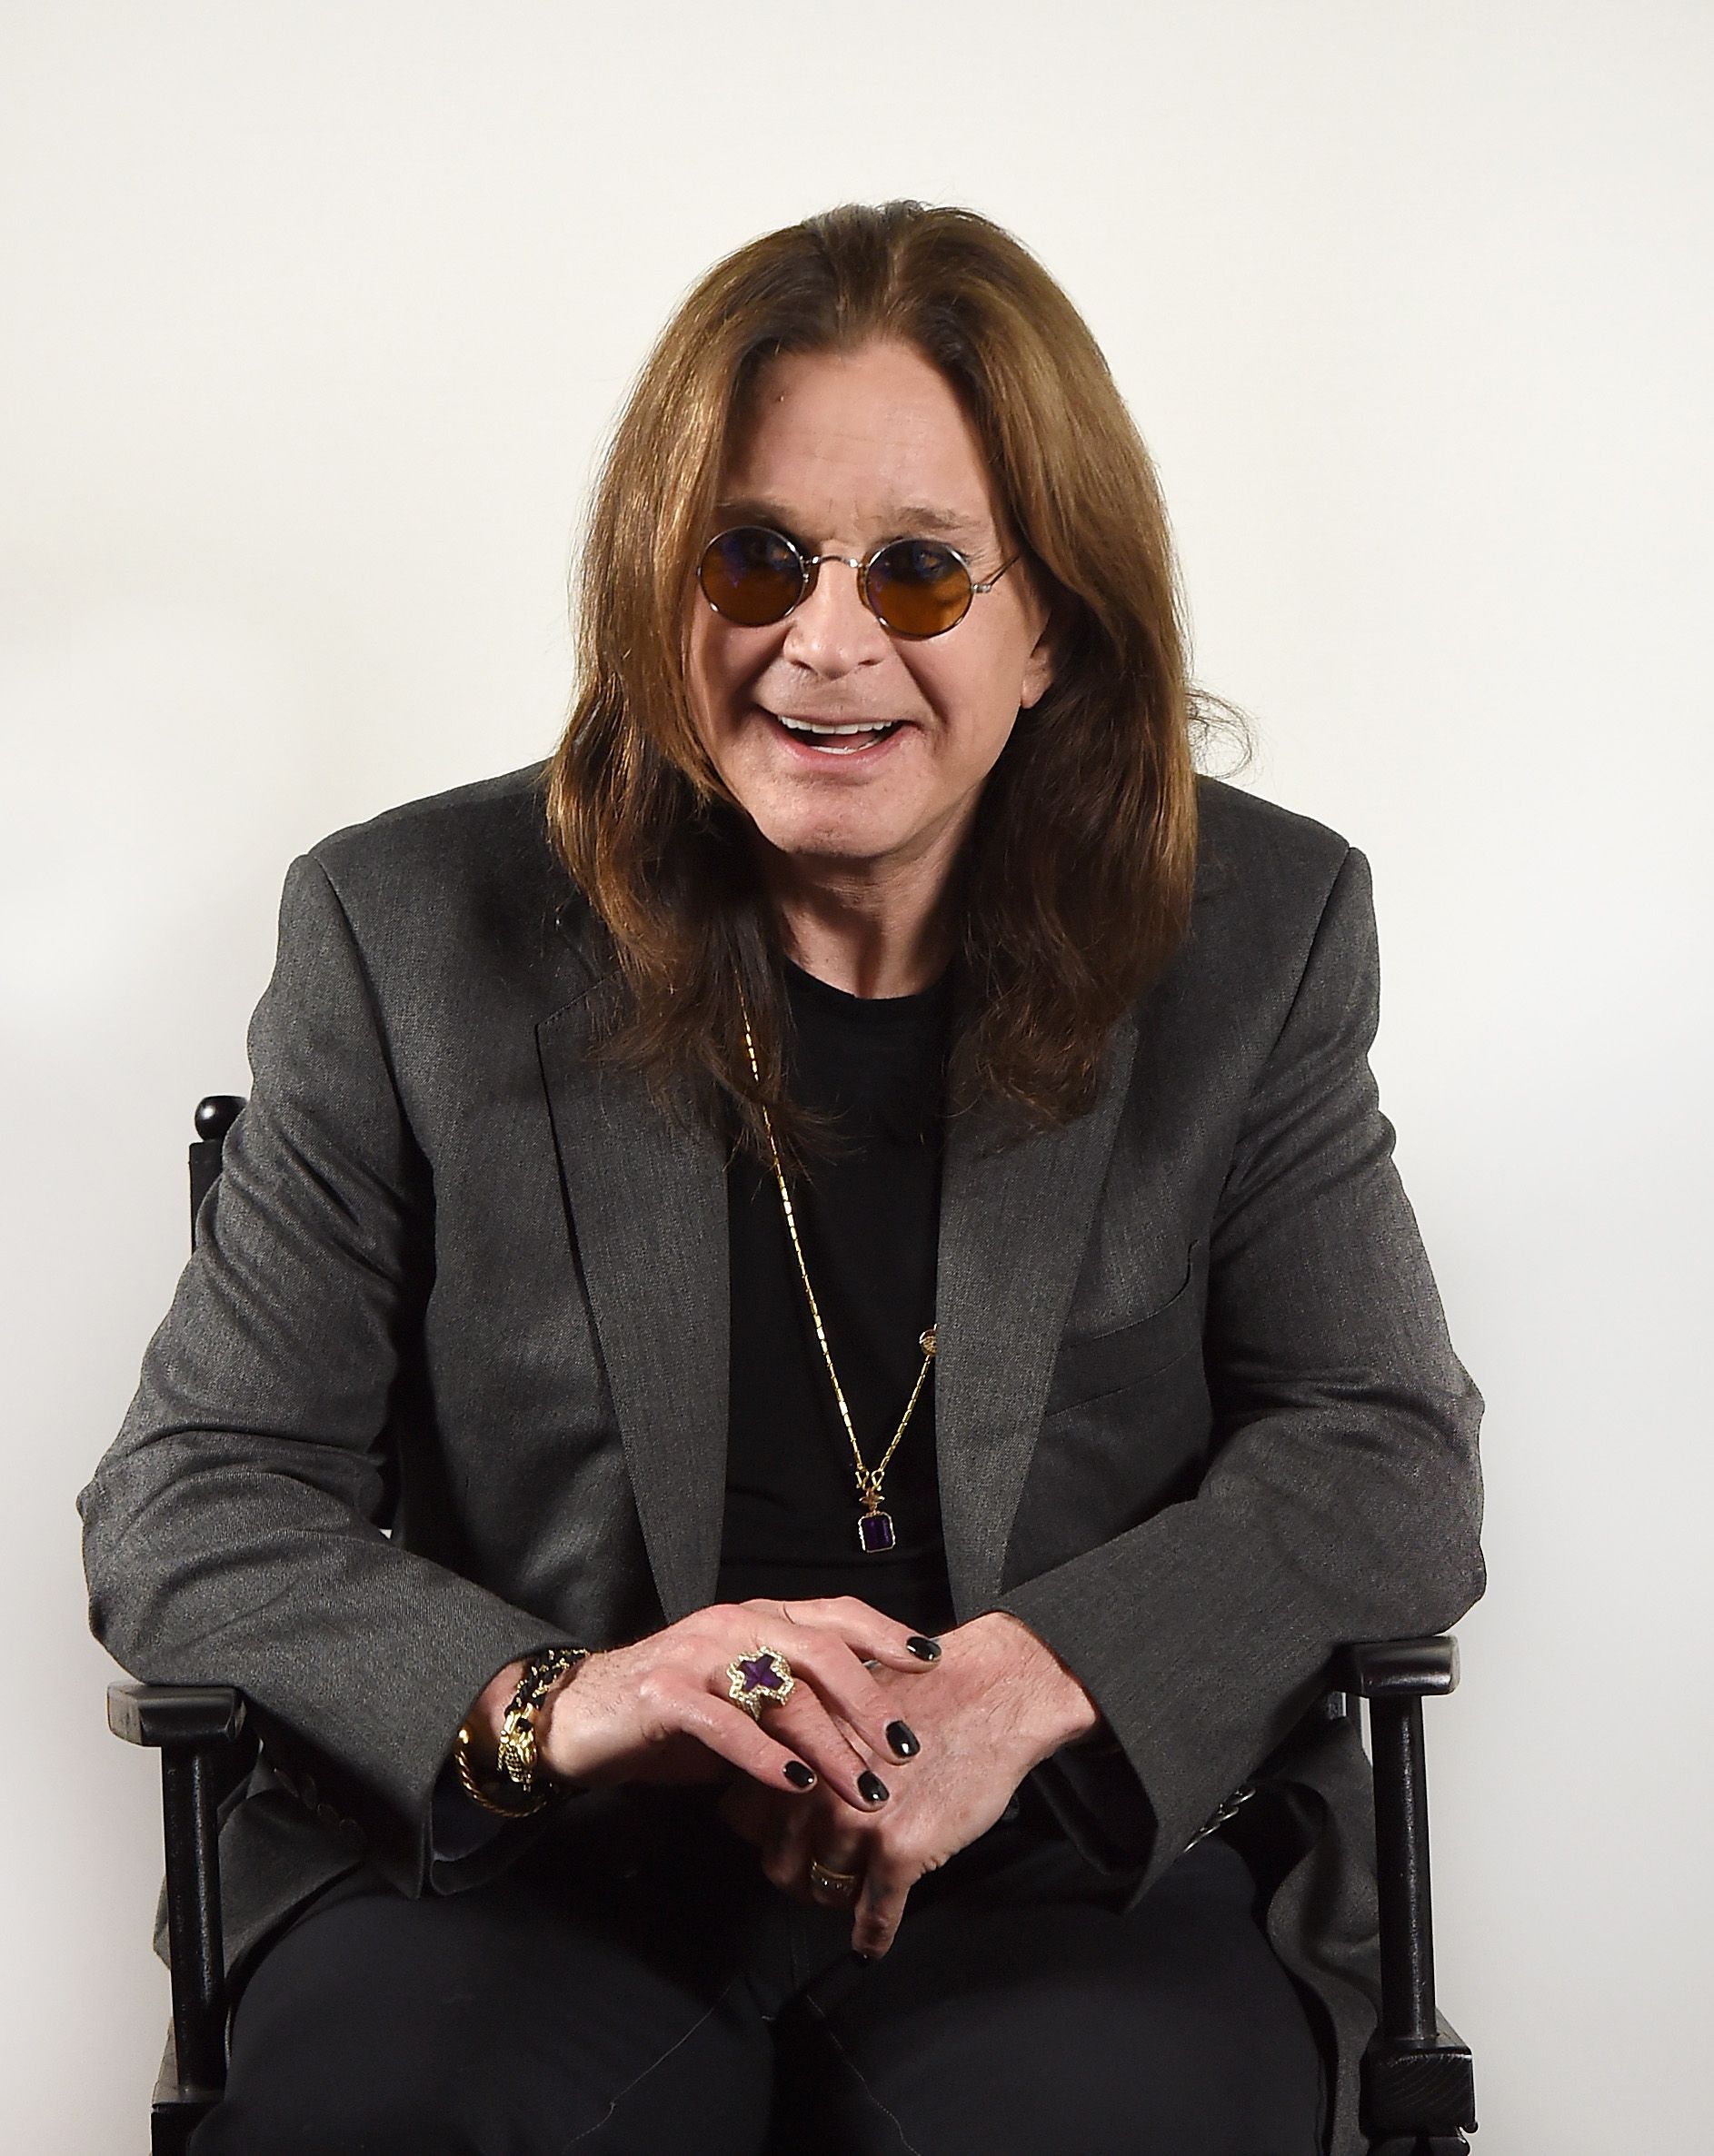 Ozzy Osbourne during a Press Conference at his Los Angeles Home on February 6, 2018, in Los Angeles, California. | Source: Getty Images